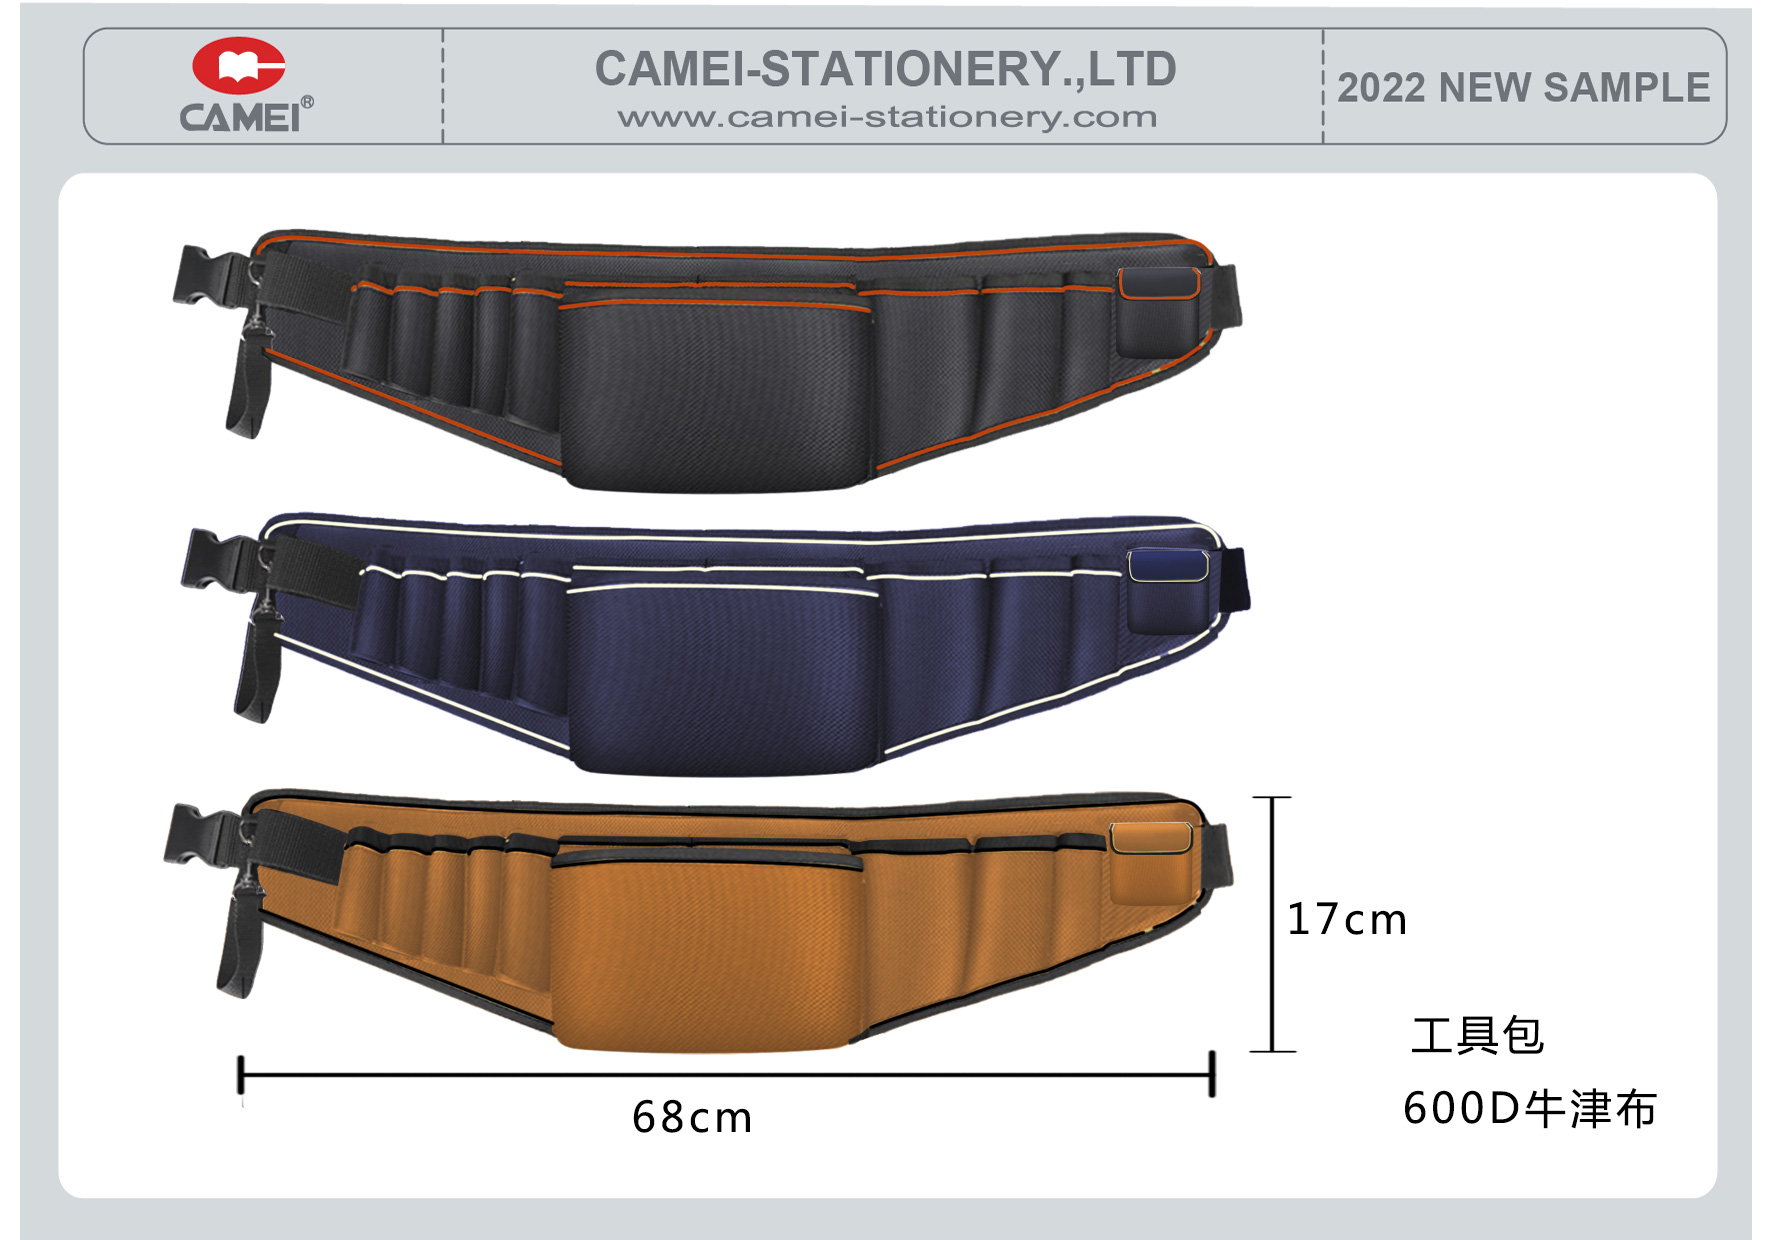 Cheapest Factory 3 Ring Binder Pouch - Fashion heavy duty 600D oxford tool bag belt multi compartments of different sizes and depth gardening apron waist bag – CAMEI